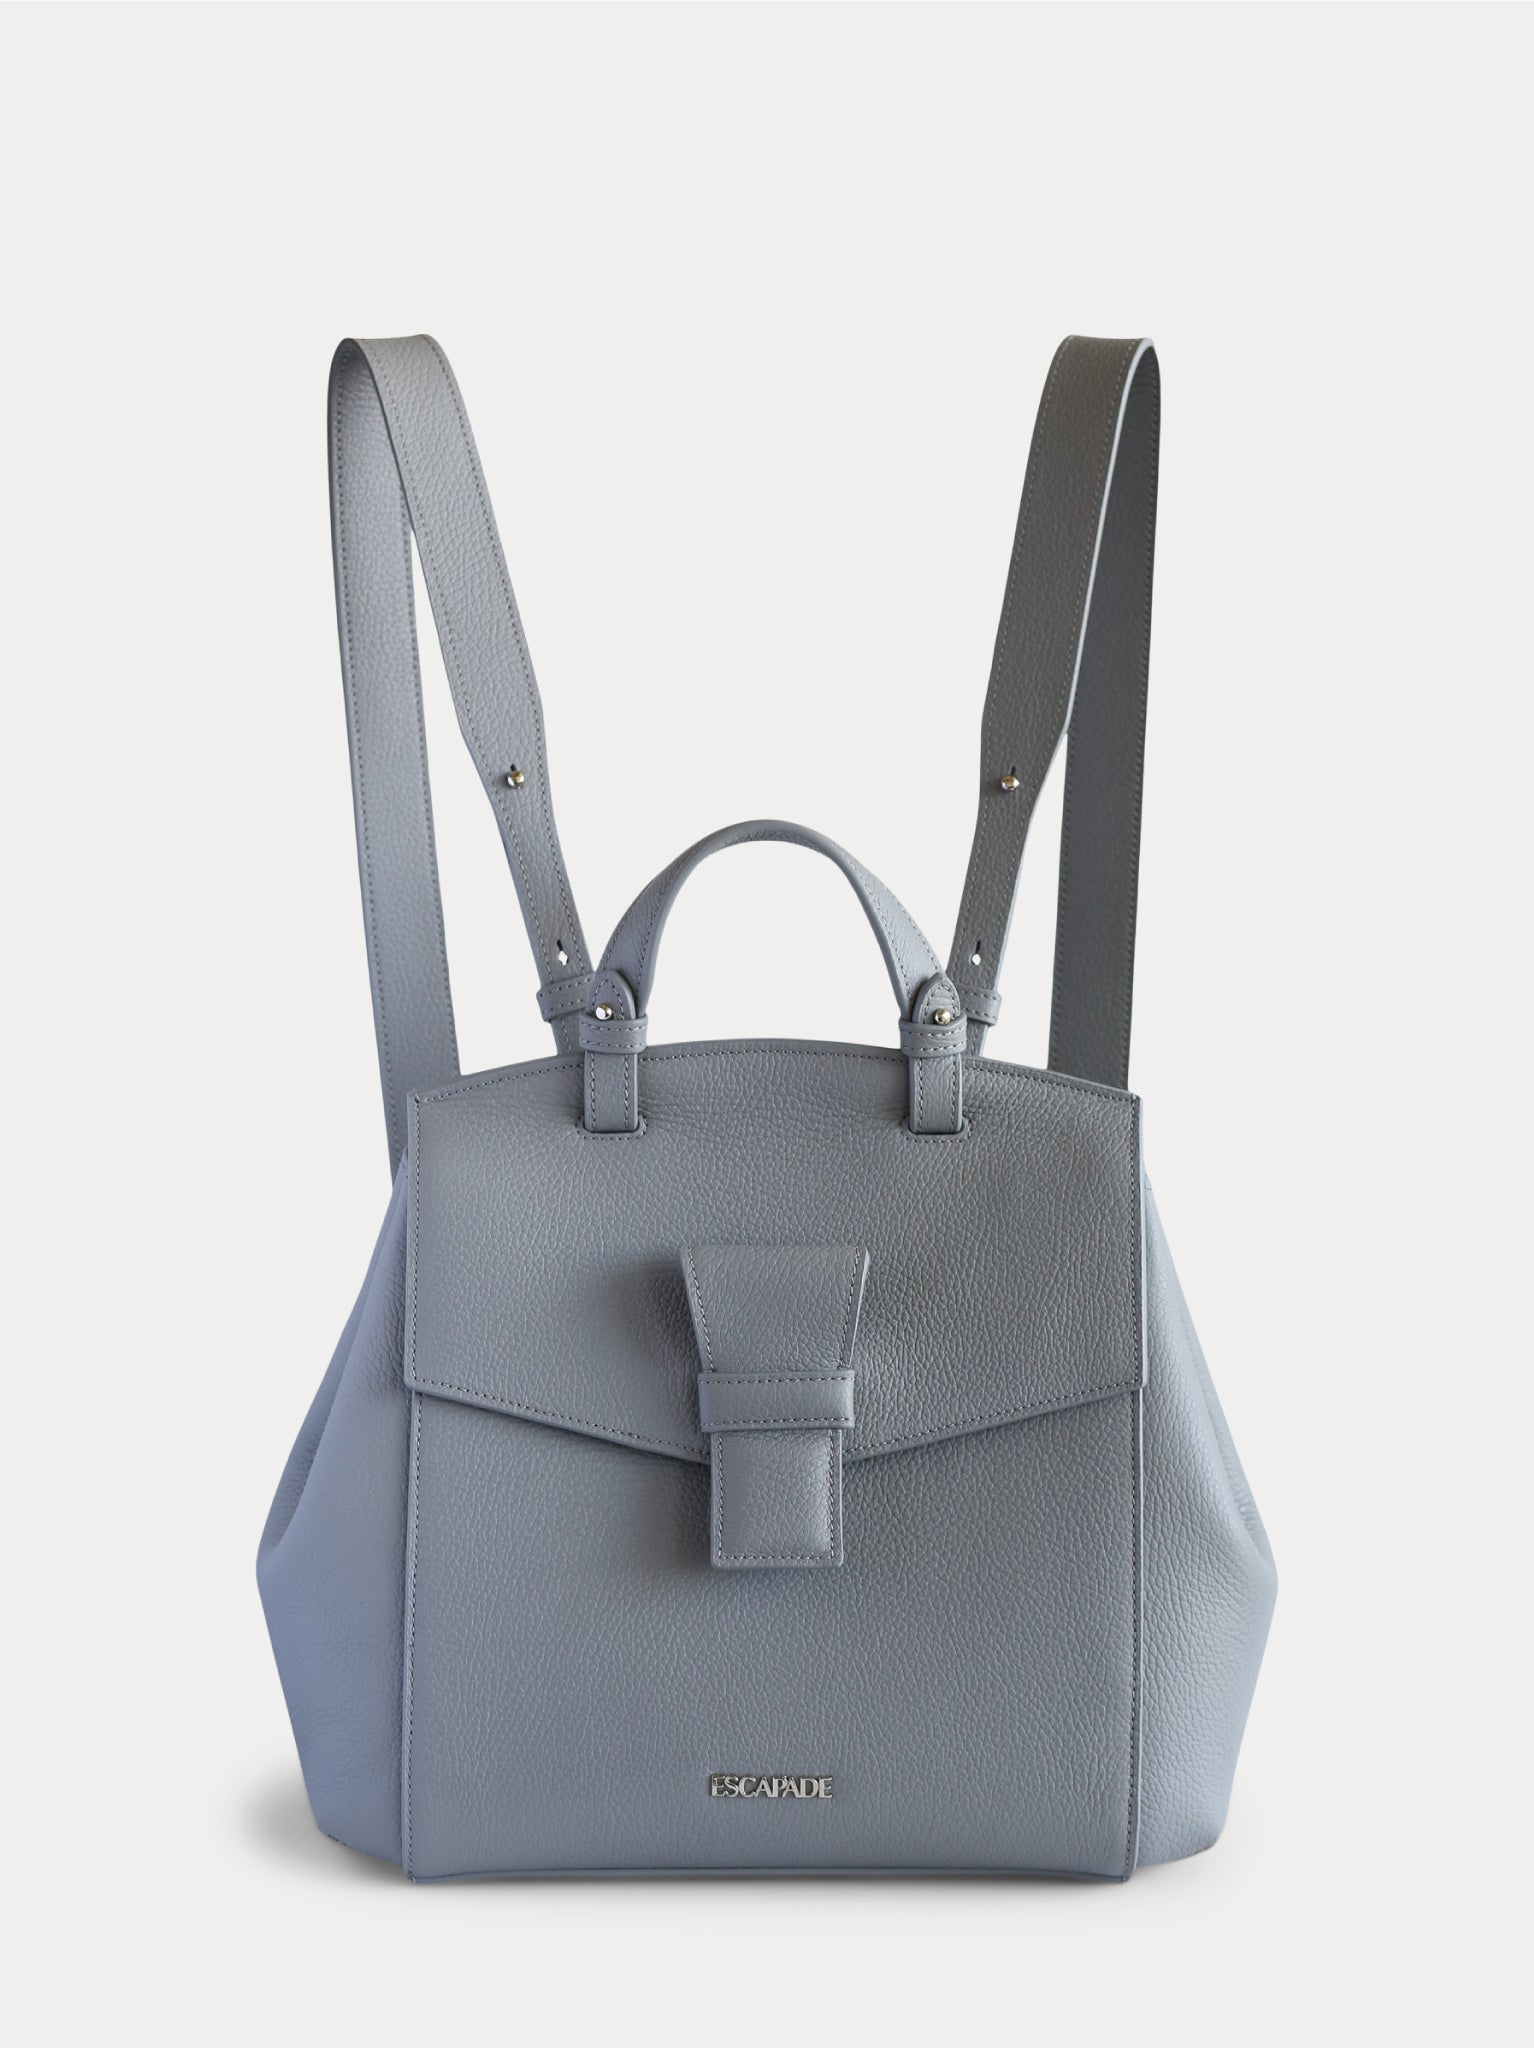 Convertible leather tote bag